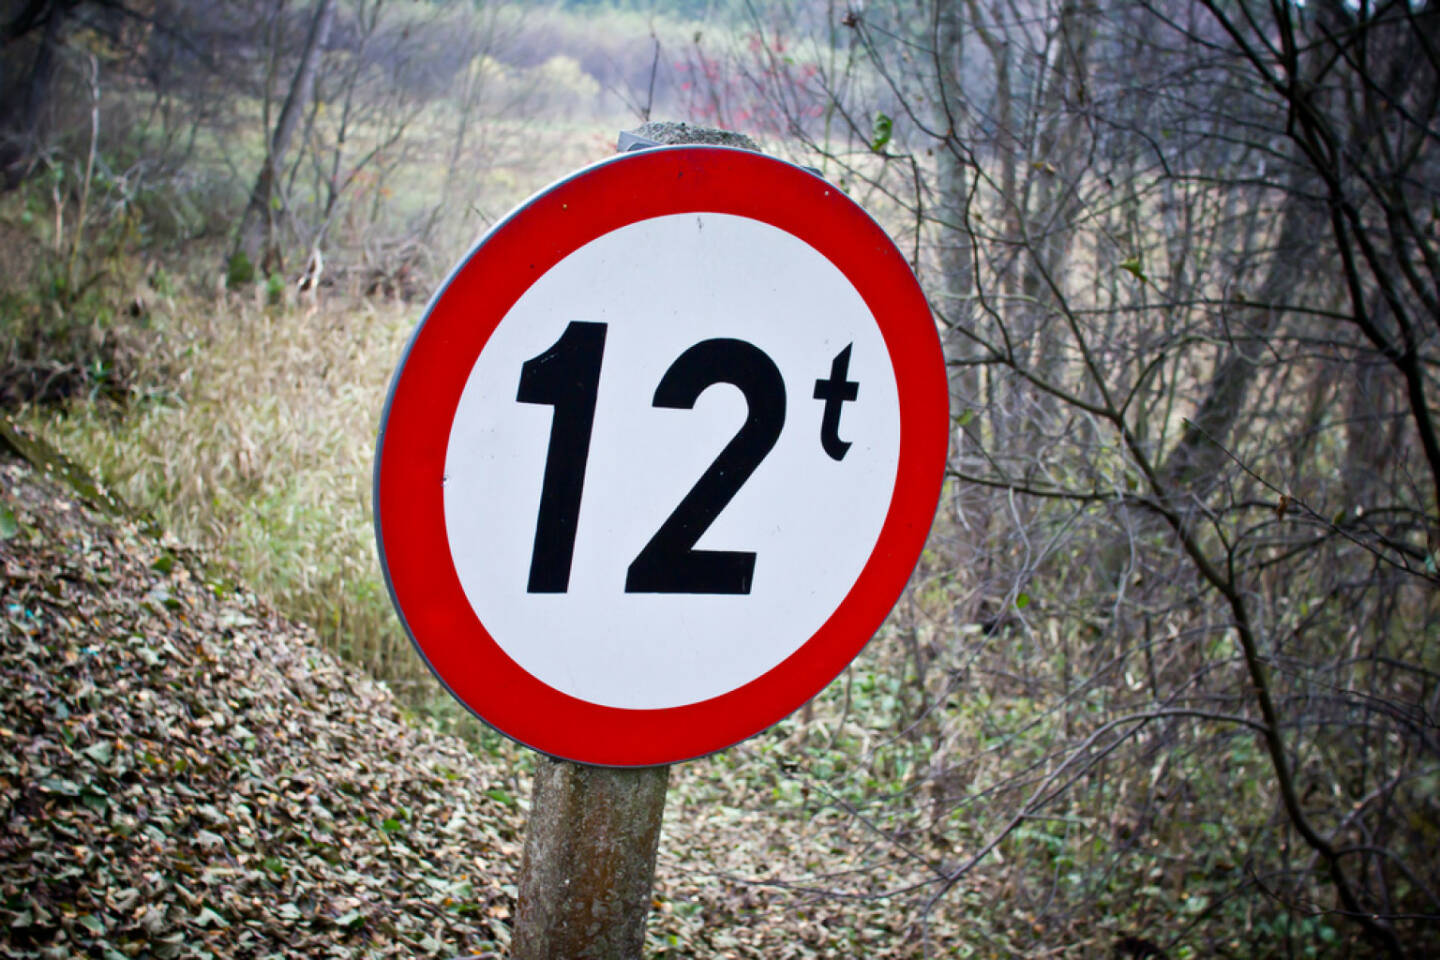 12, Zwölf, http://www.shutterstock.com/de/pic-159351332/stock-photo-weight-limitation-sign-in-forest-in-shape-of-circle.html 